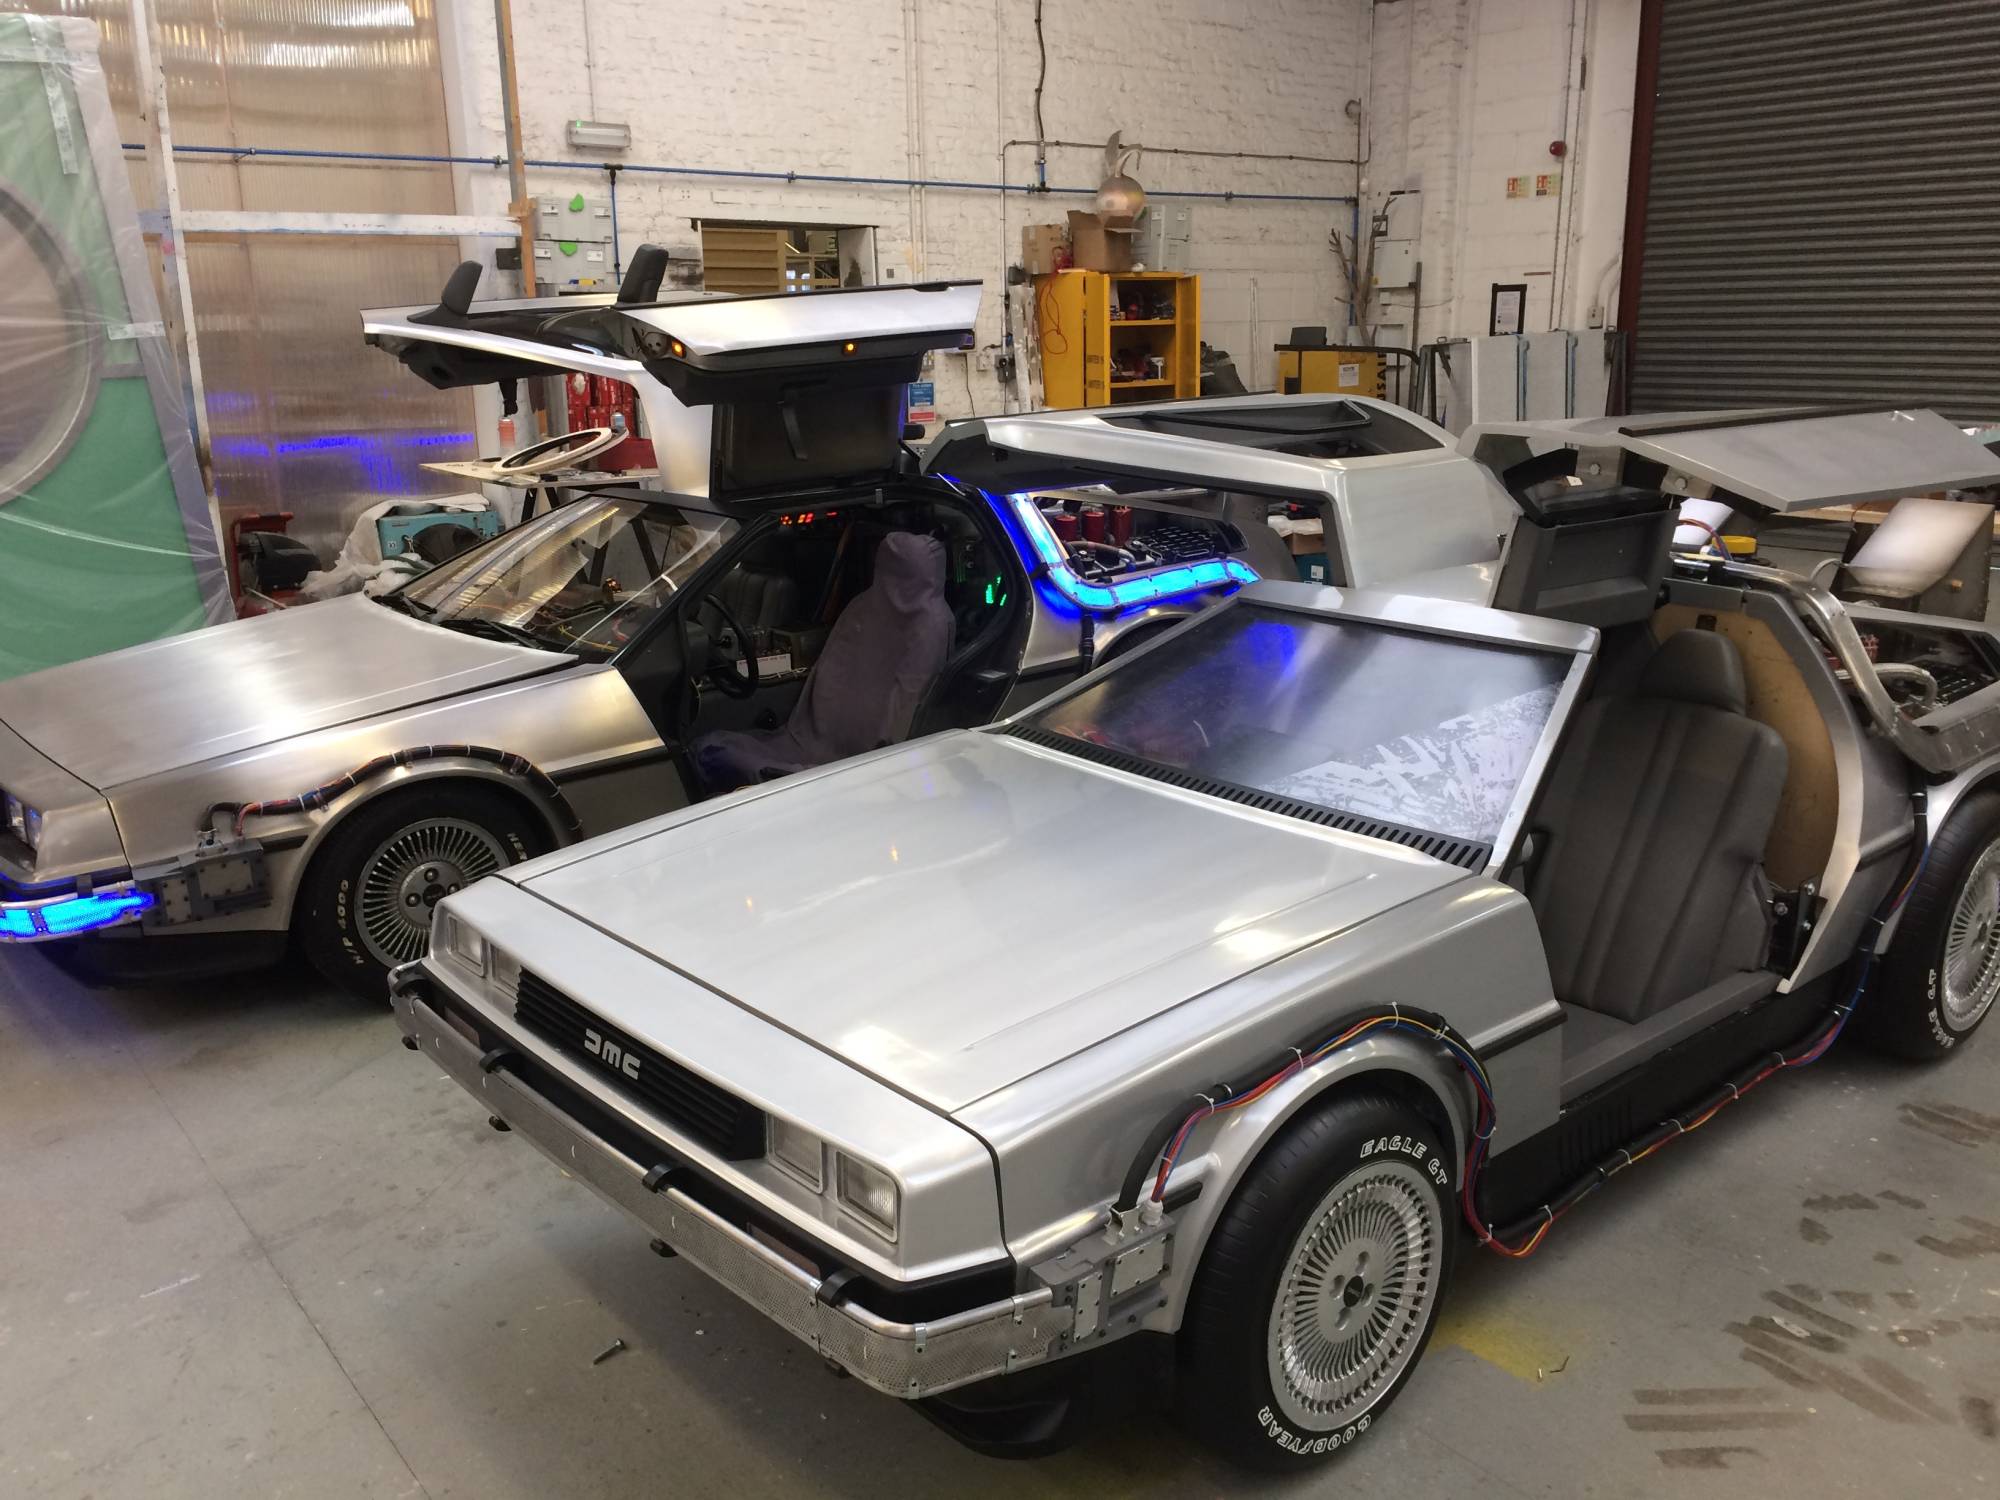 The BTTF Car DeLorean Time Machine Hire displayed with the BTTF Musical stage car as it was finished before being delivered to the Theatre